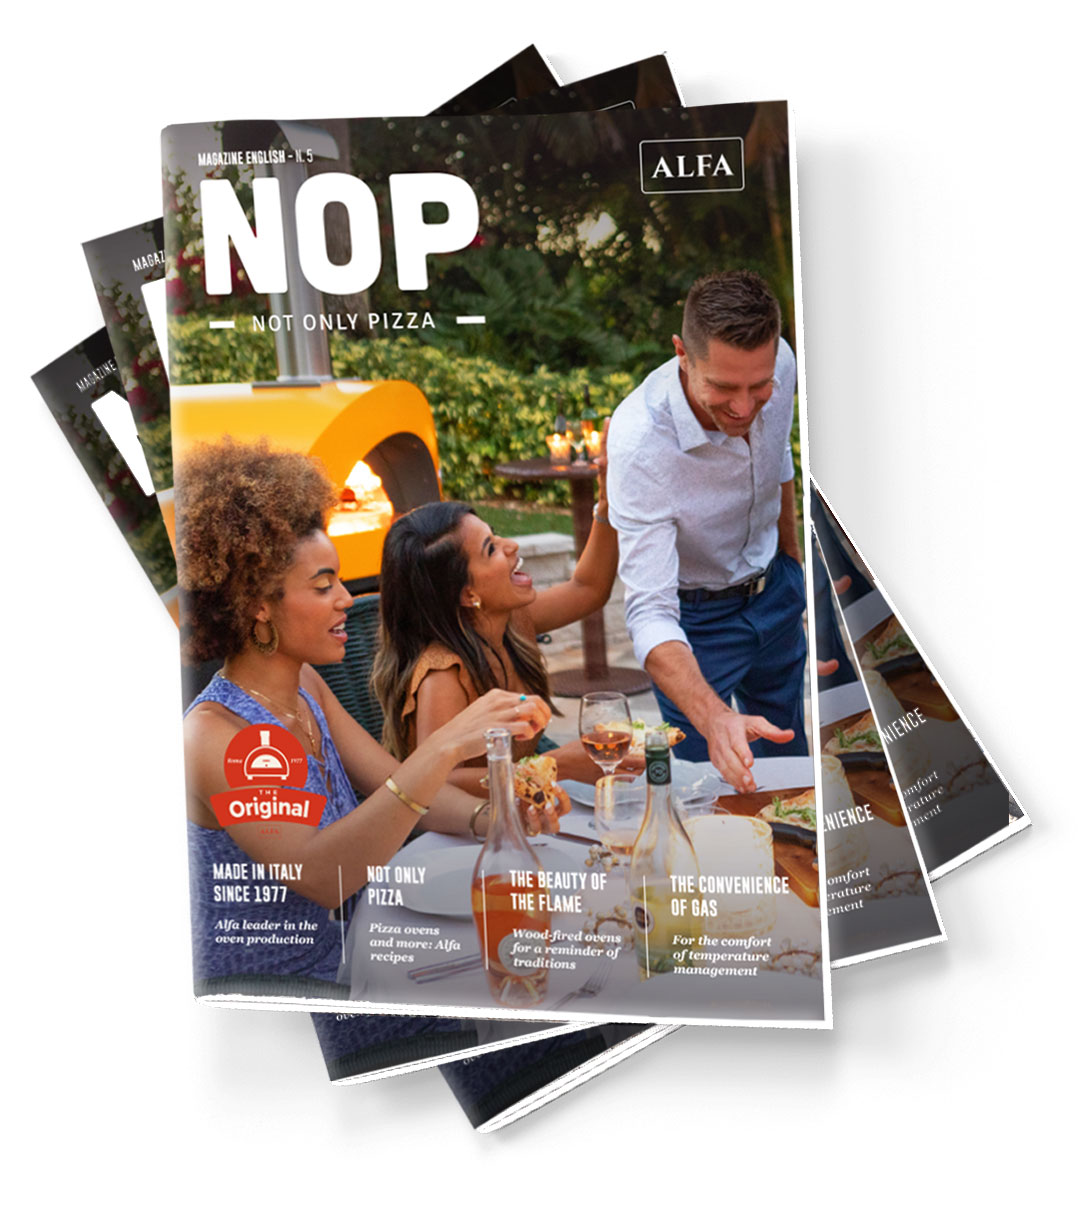 NOP - Not only pizza | Alfa Forni